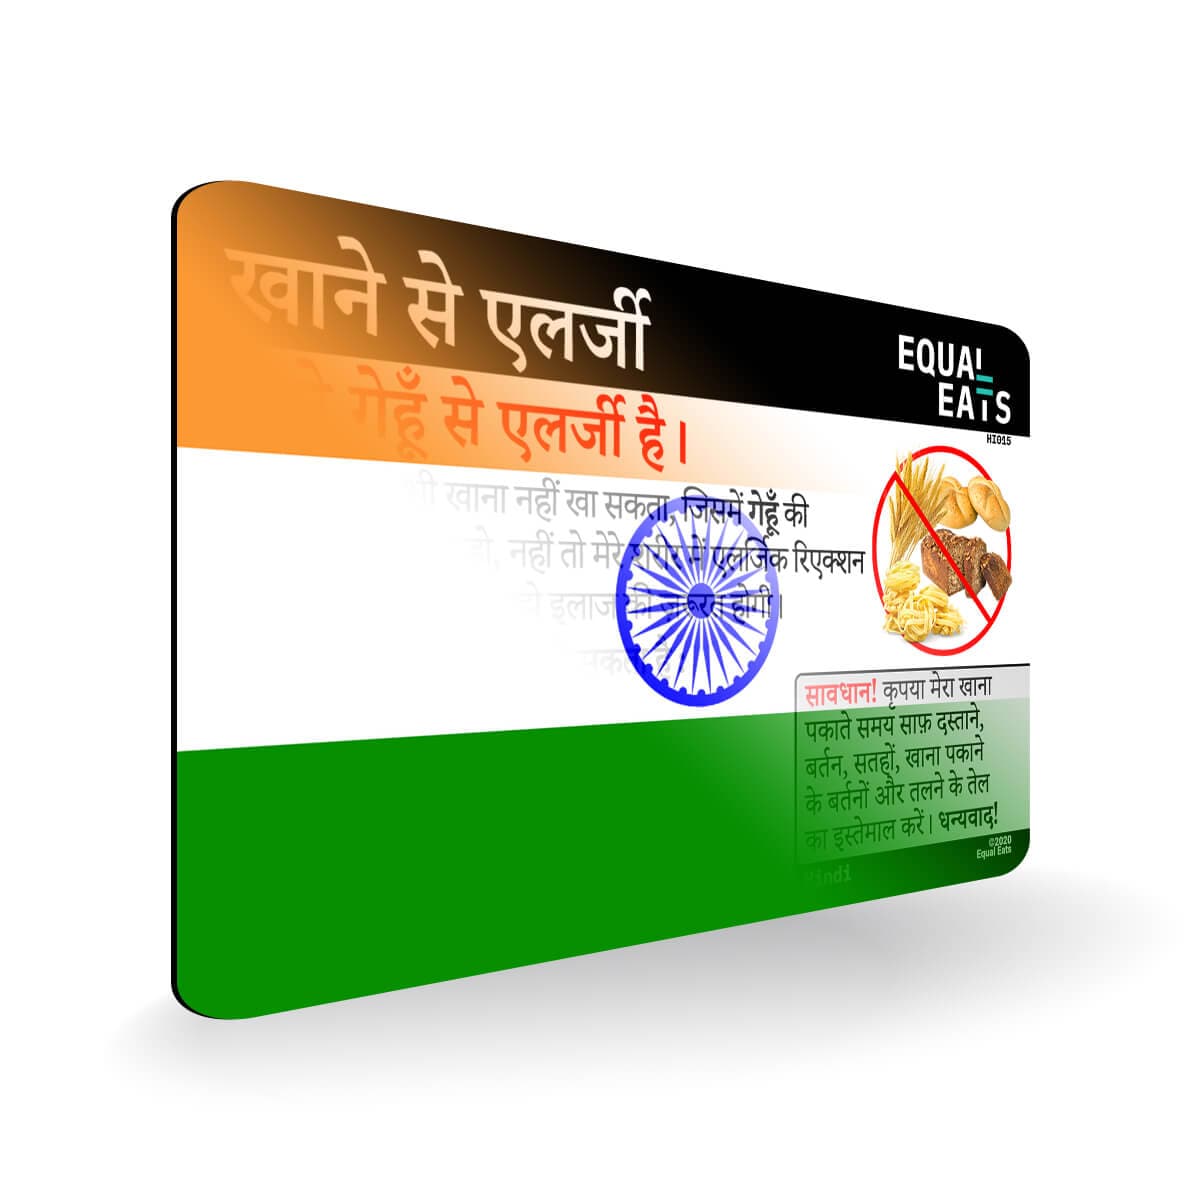 Wheat Allergy in Hindi. Wheat Allergy Card for India